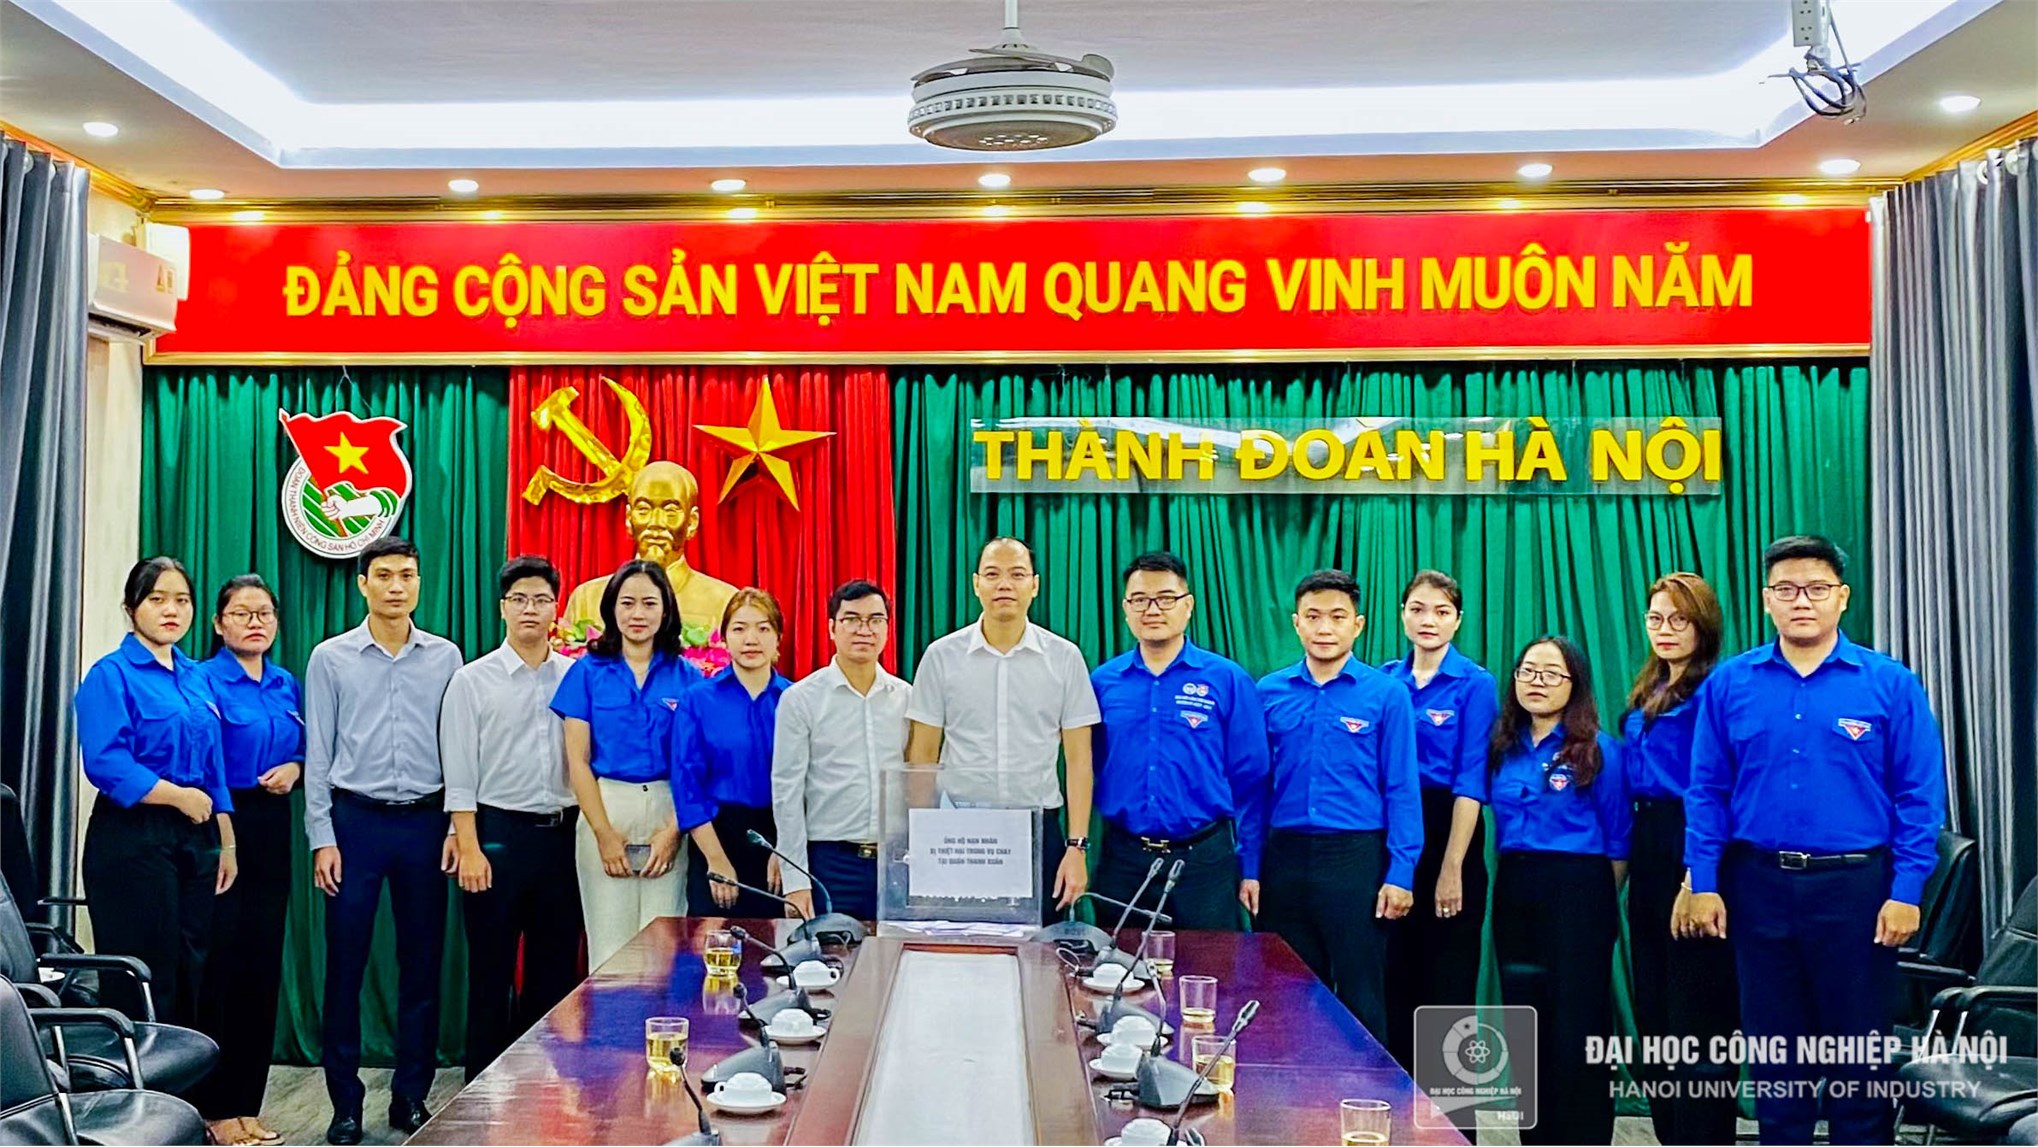 Hanoi University of Industry joins hands to support Hanoi fire victims